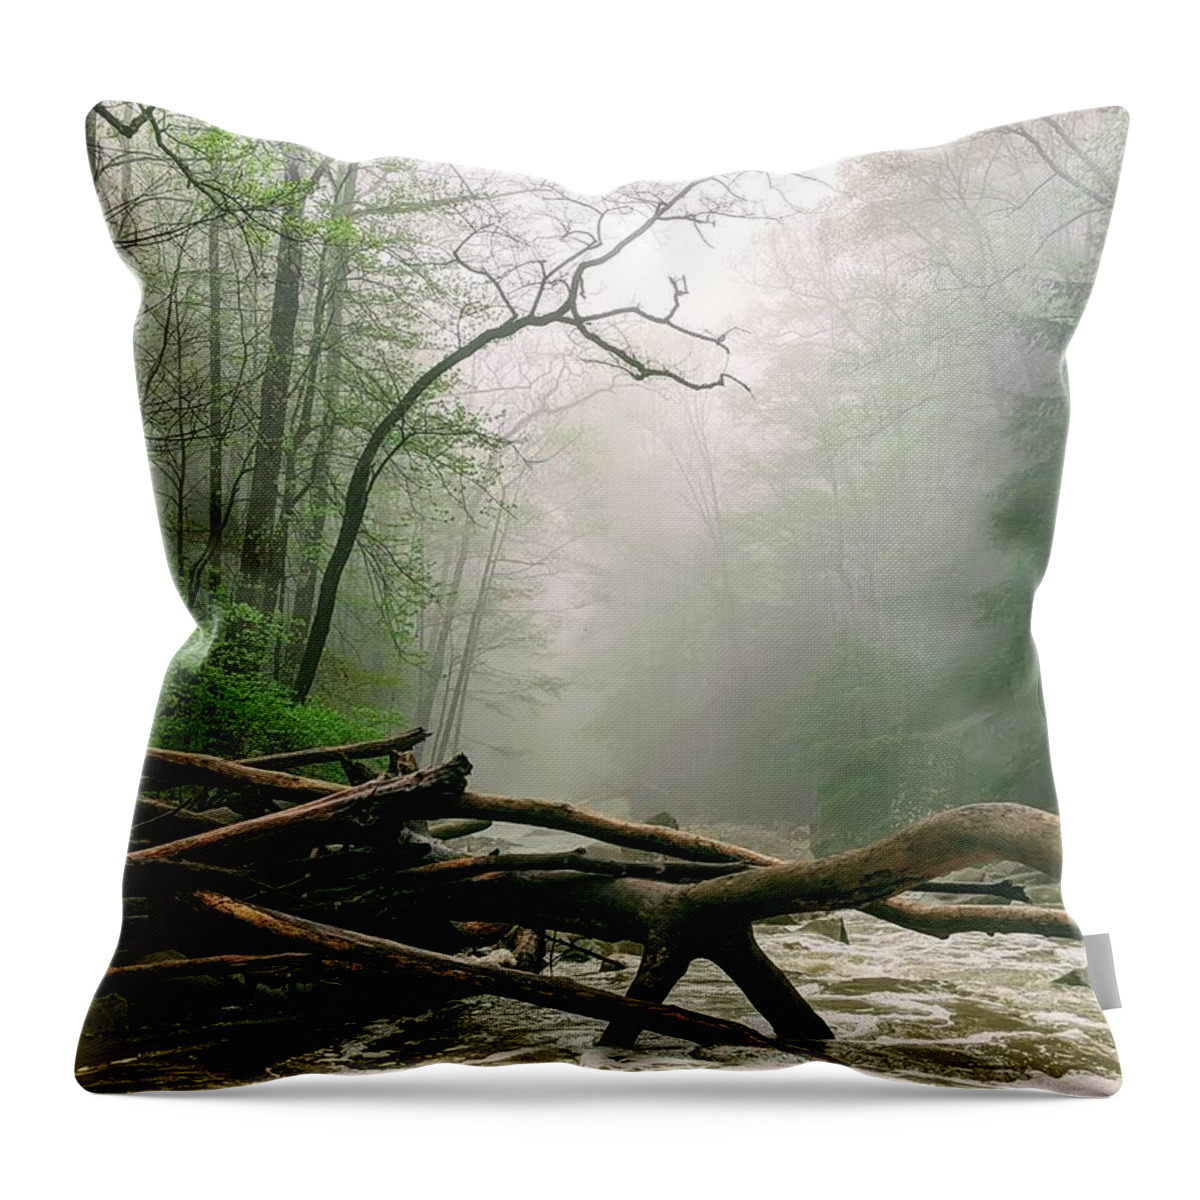 River Throw Pillow featuring the photograph Foggy River by Brad Nellis